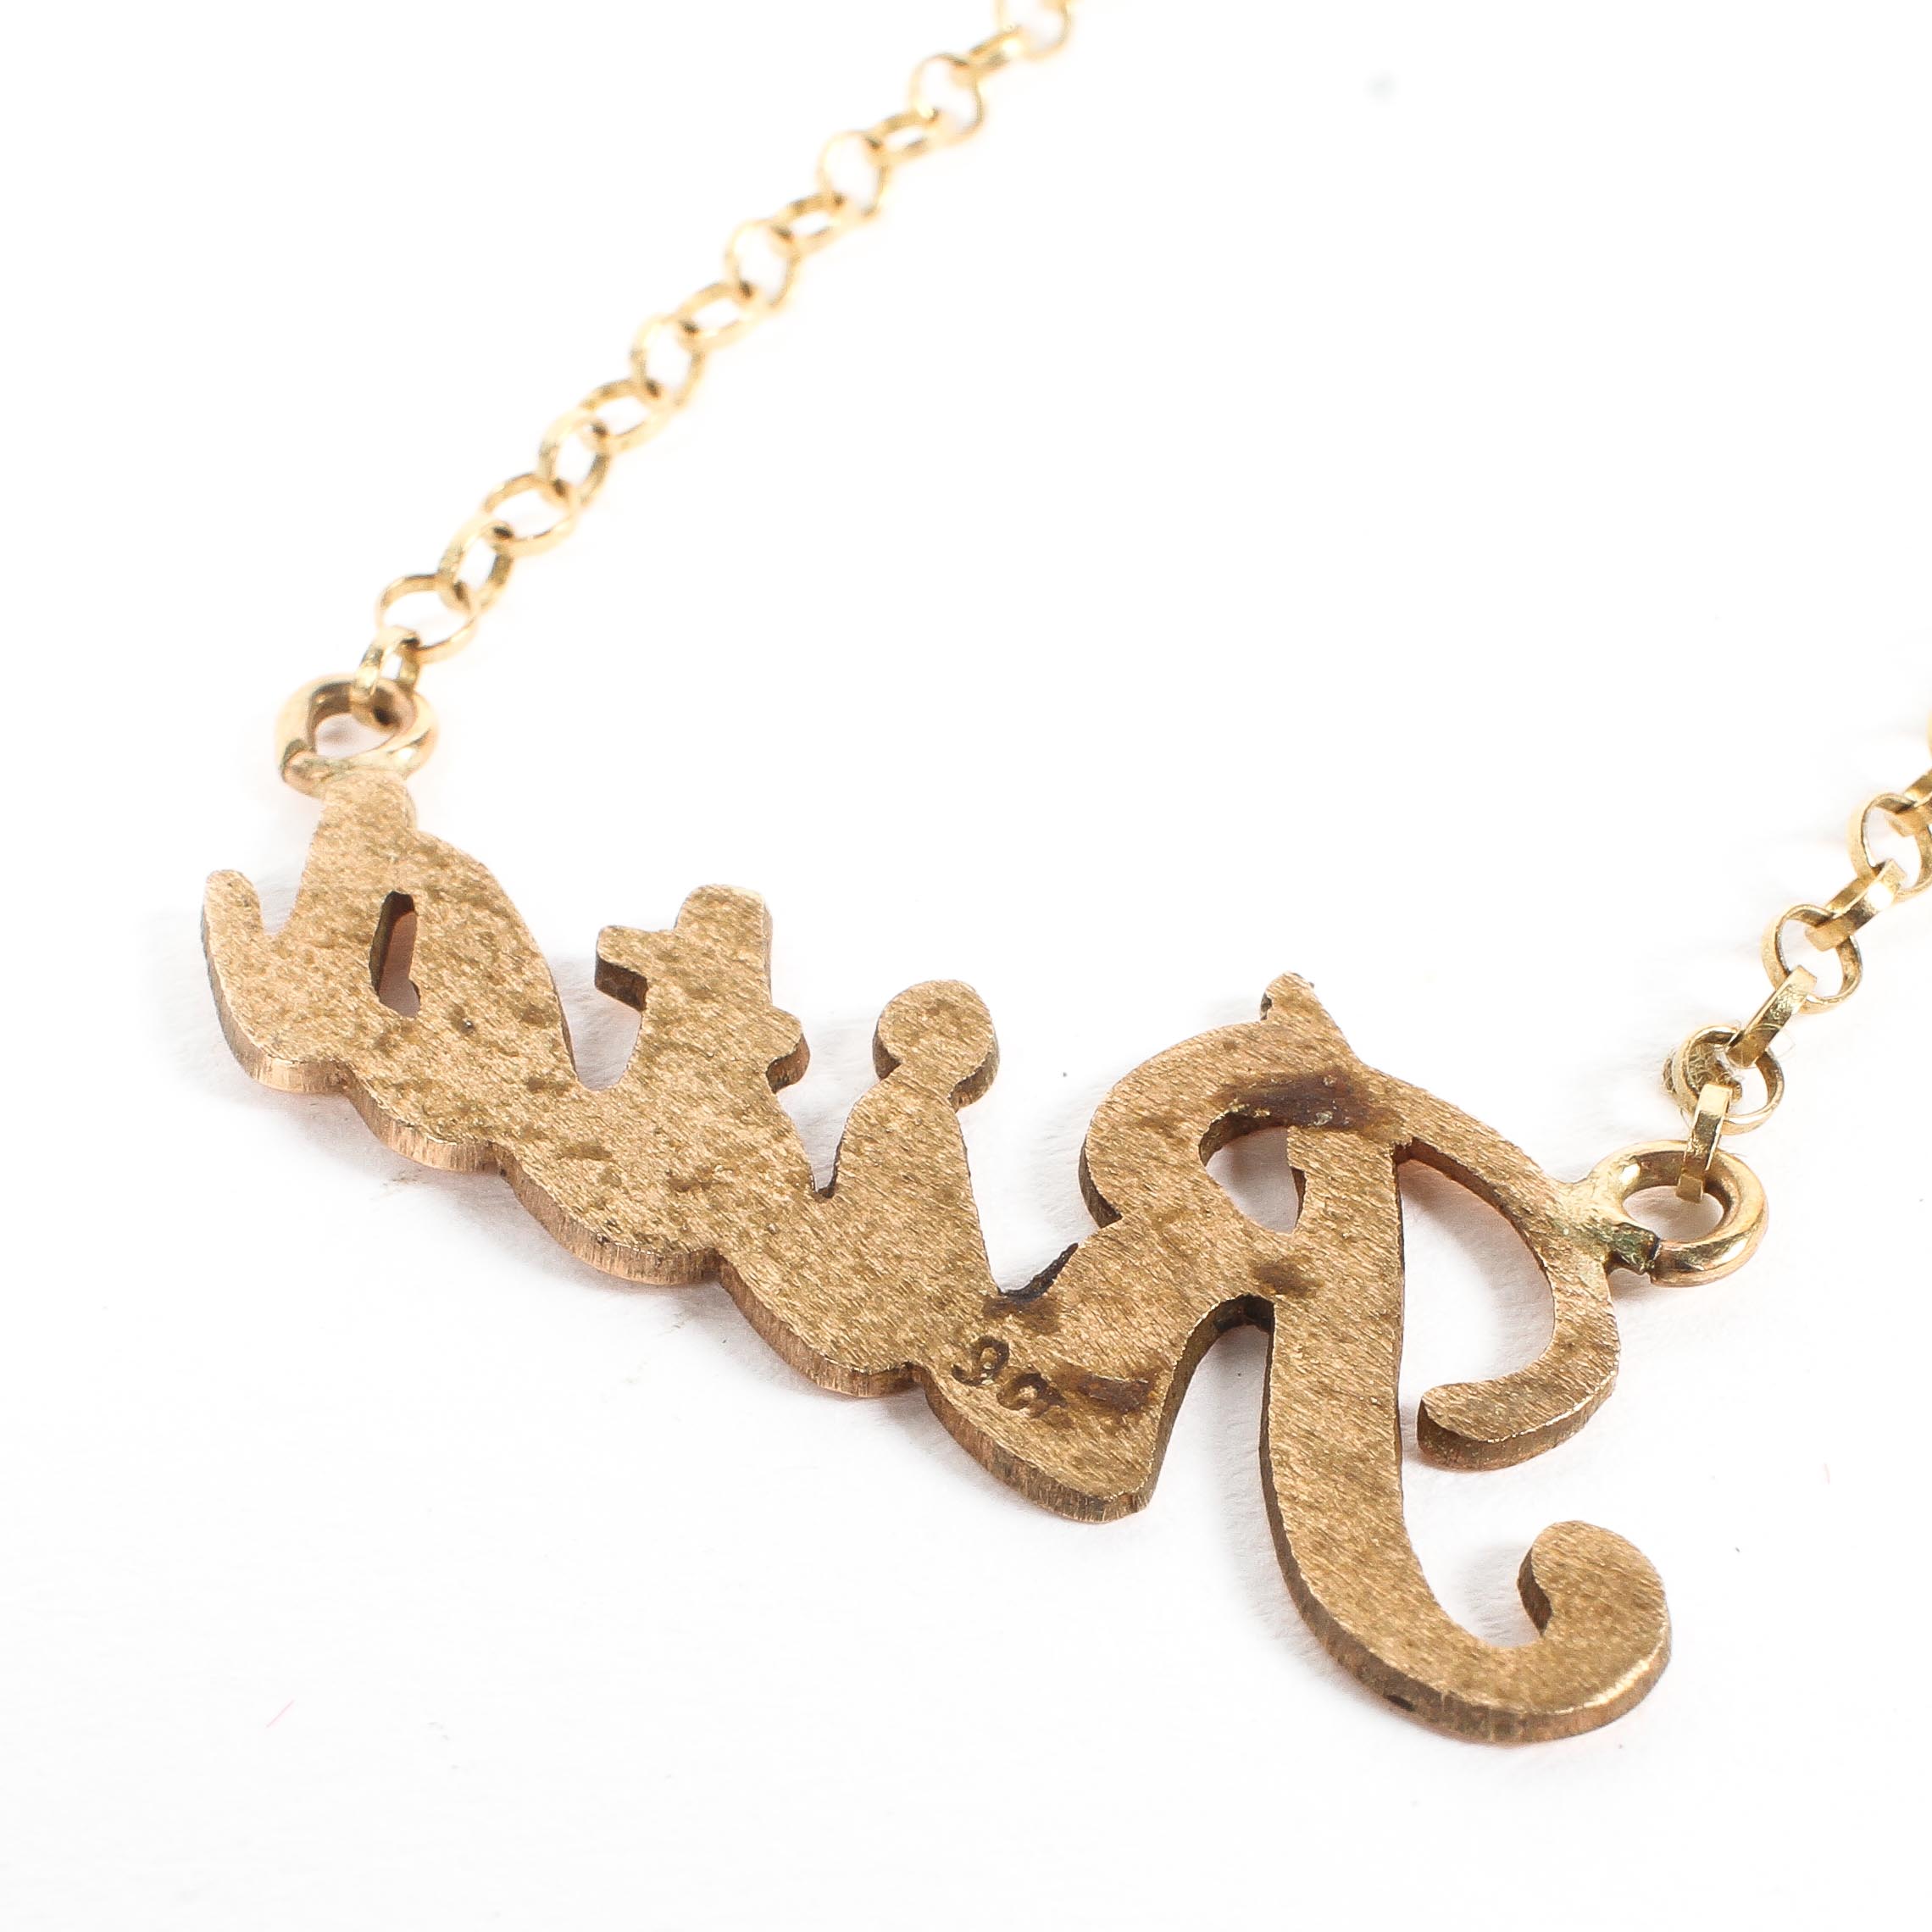 A 9ct gold pendant name necklace marked 'Rita', 3. - Image 2 of 2